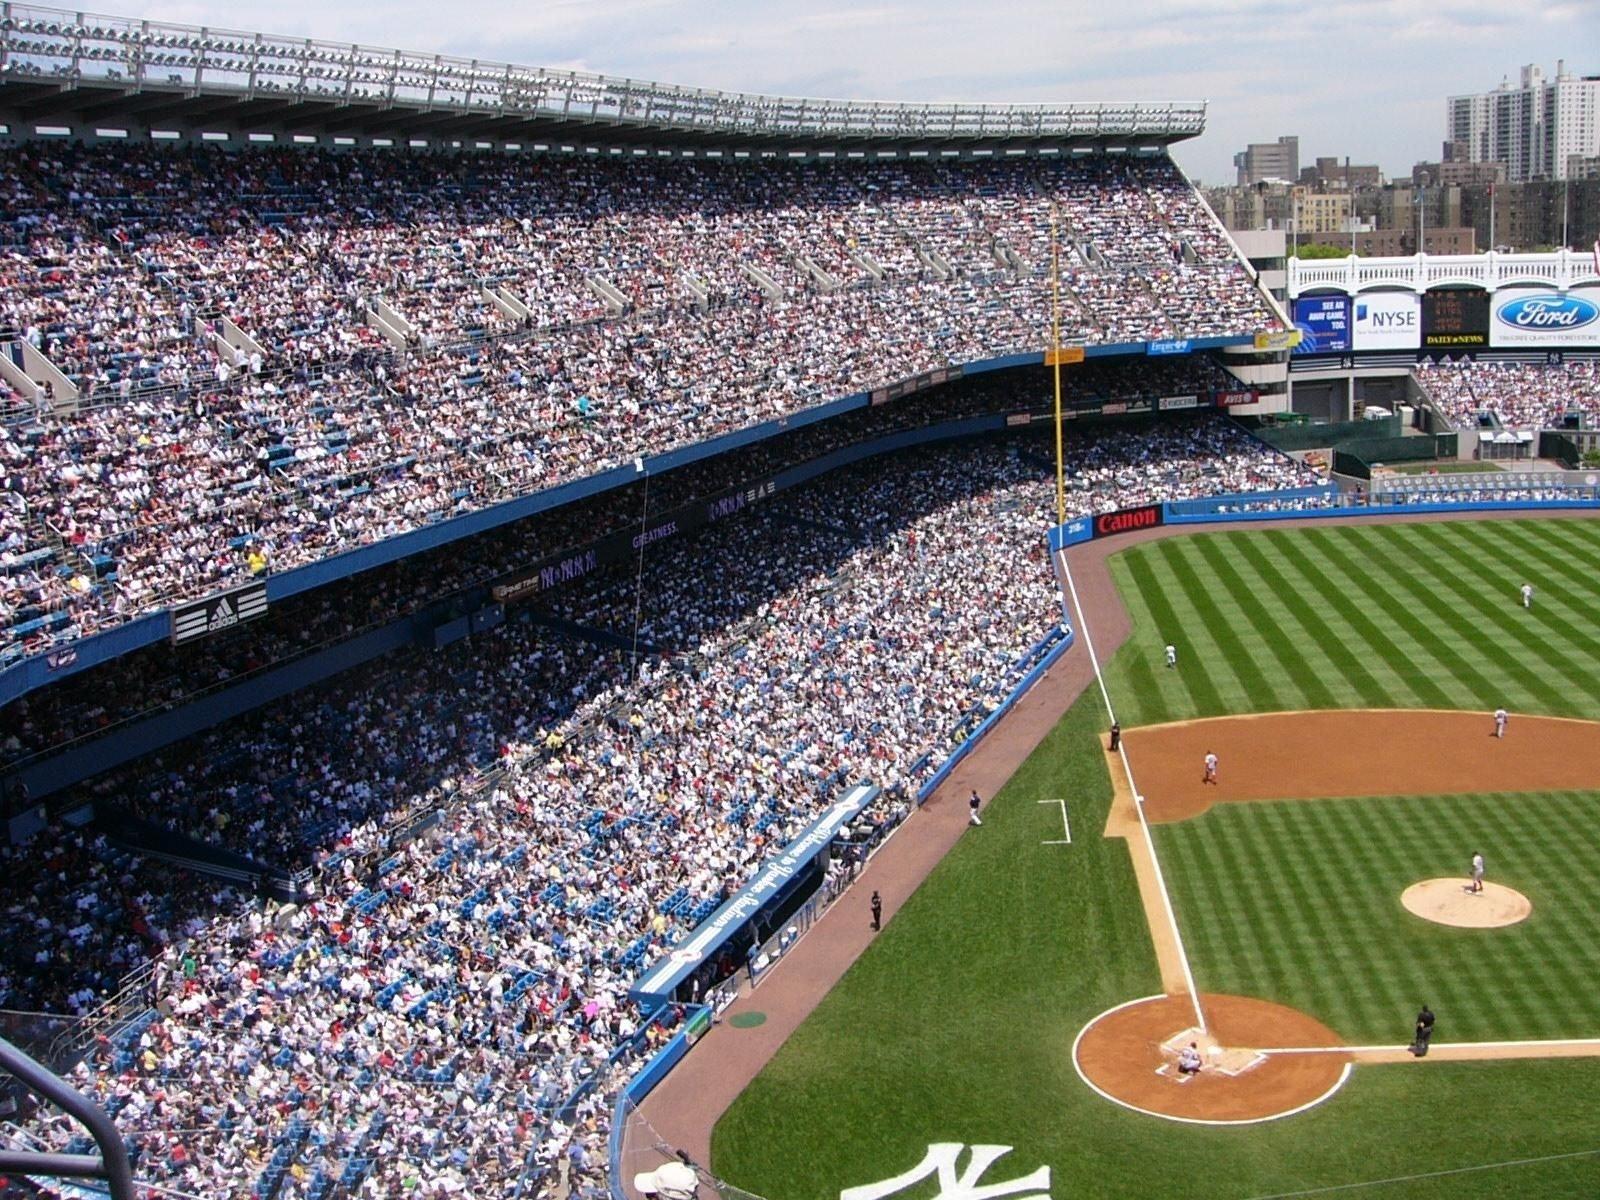 A baseball stadium full of people

Description automatically generated with low confidence